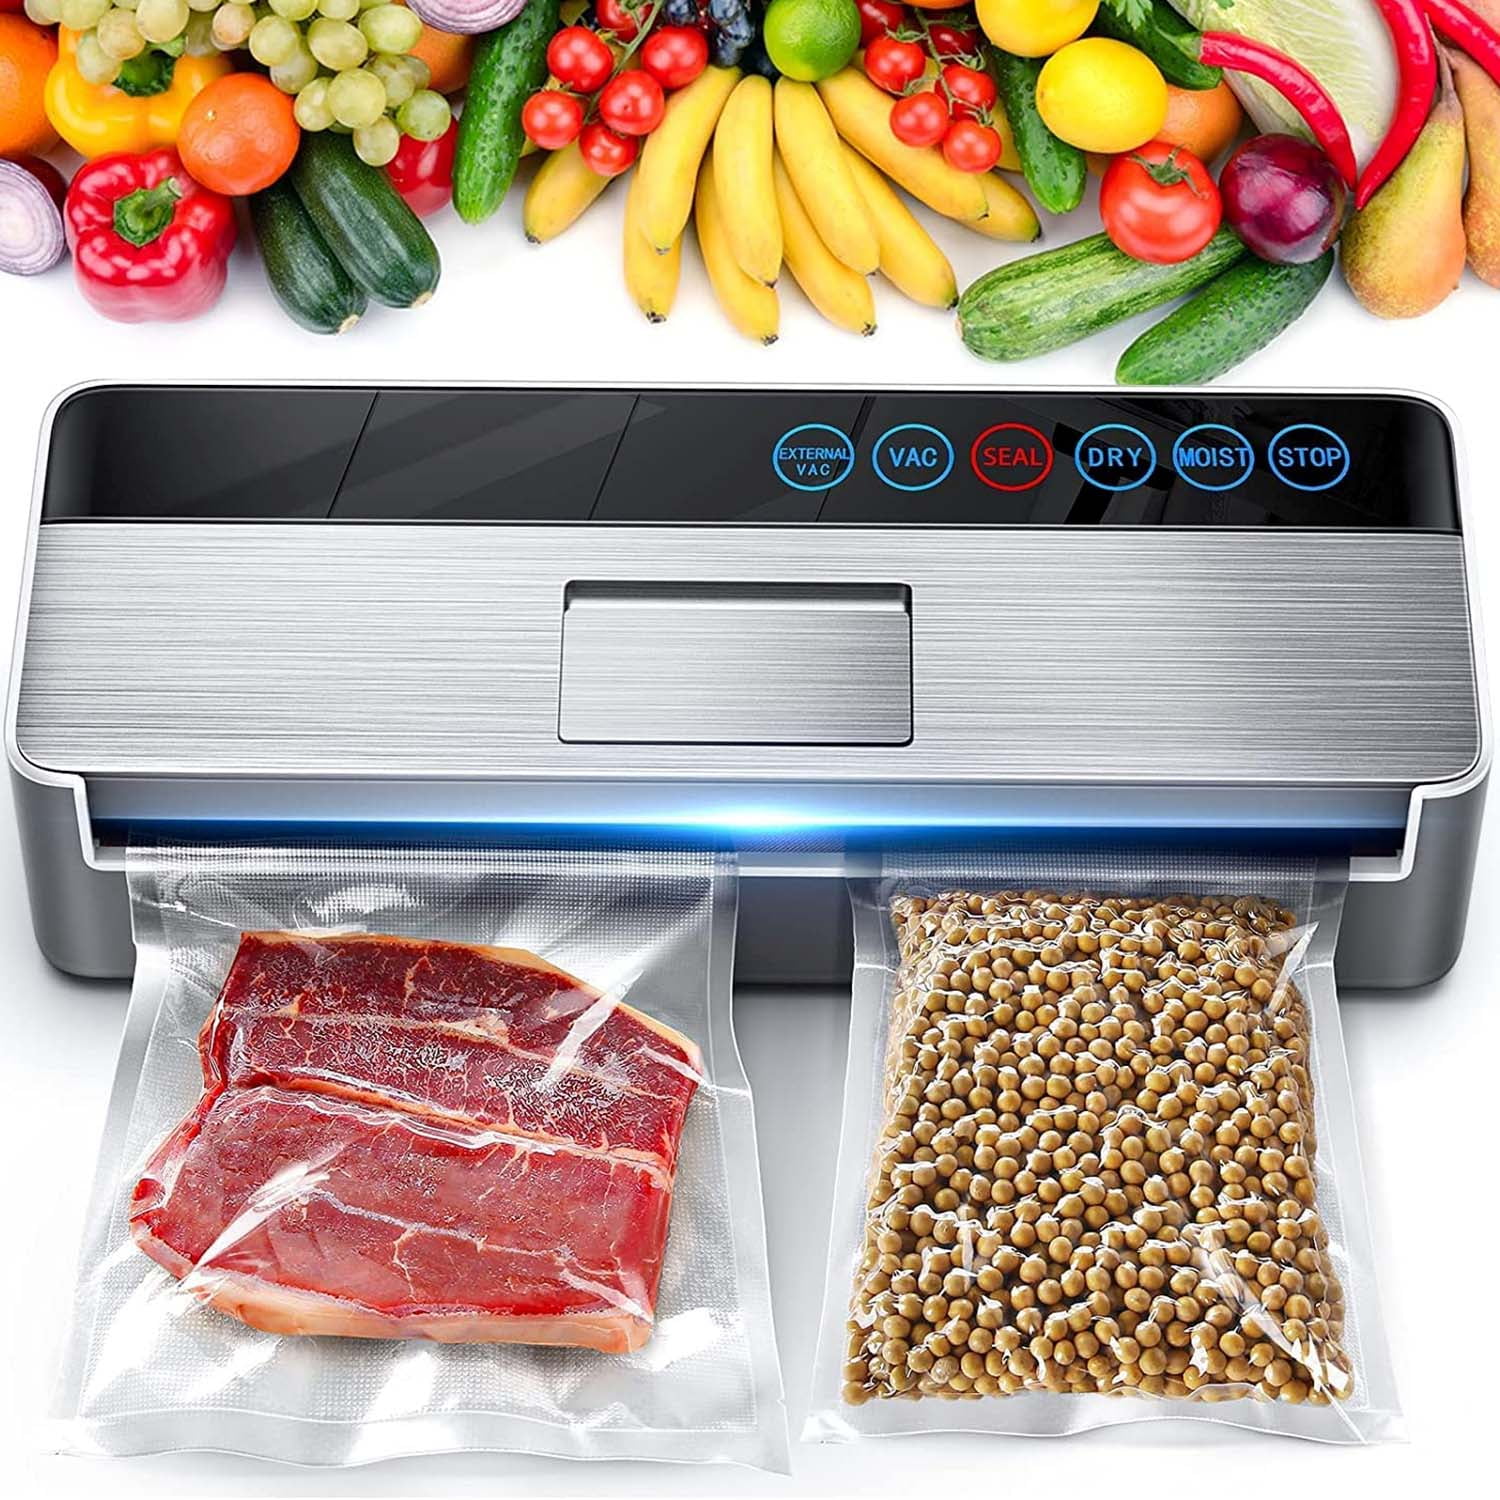 Aoresac Food Vacuum Sealer Machine for Food Saver Automatic Air Sealing  System for Food Storage Dry and Moist Food Modes Compact Design with 10Pcs Seal  Bags Starter Kit 